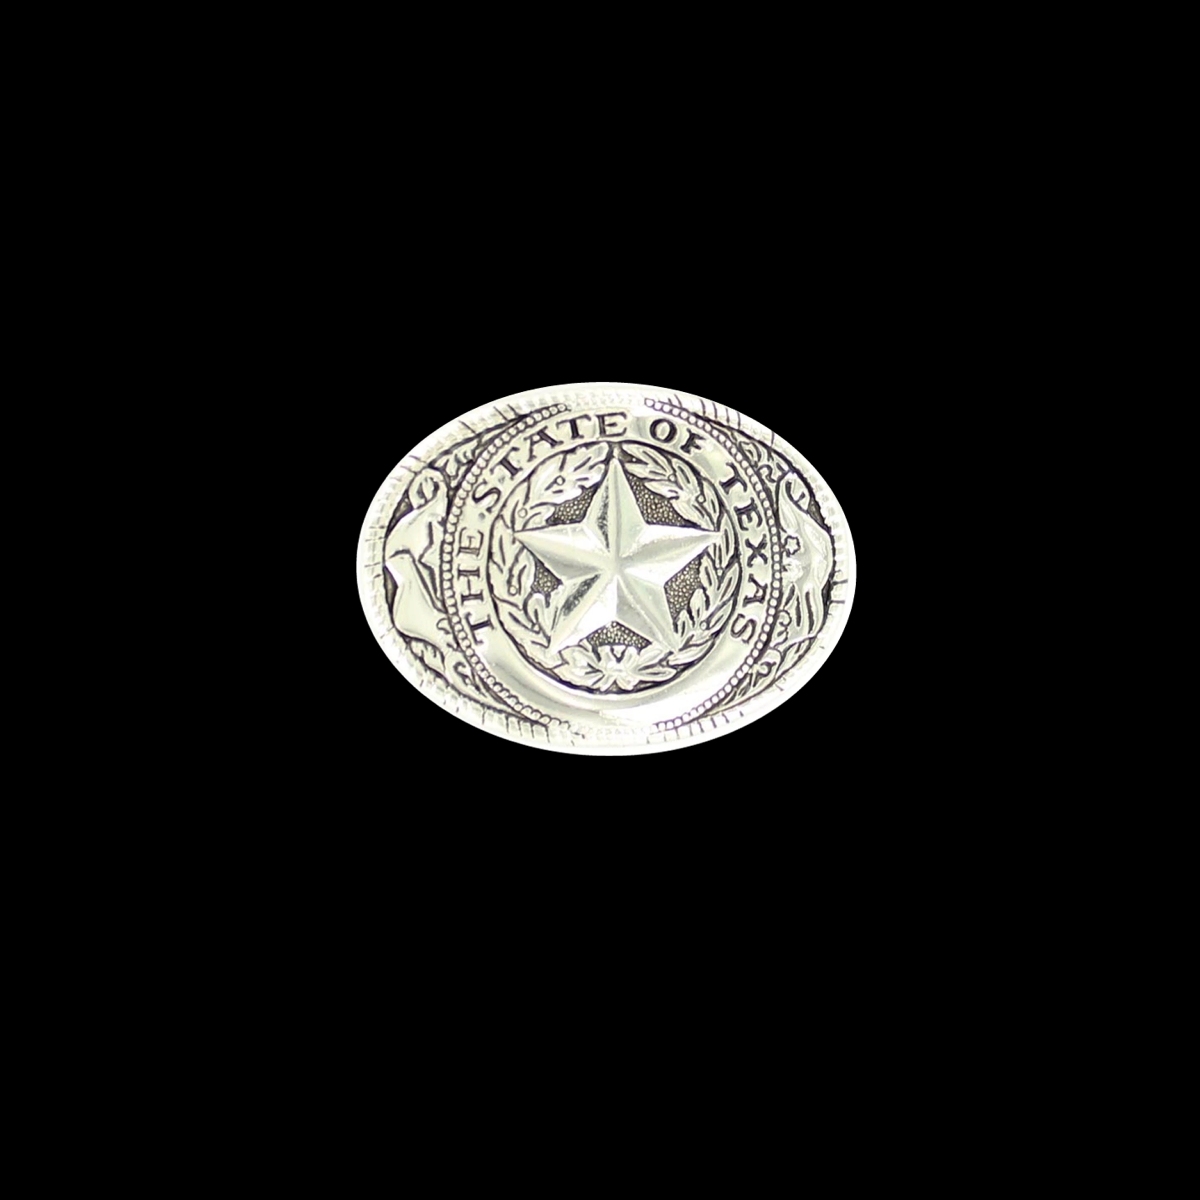 MF-36104 Belt Buckle Oval The State of Texas Nickel